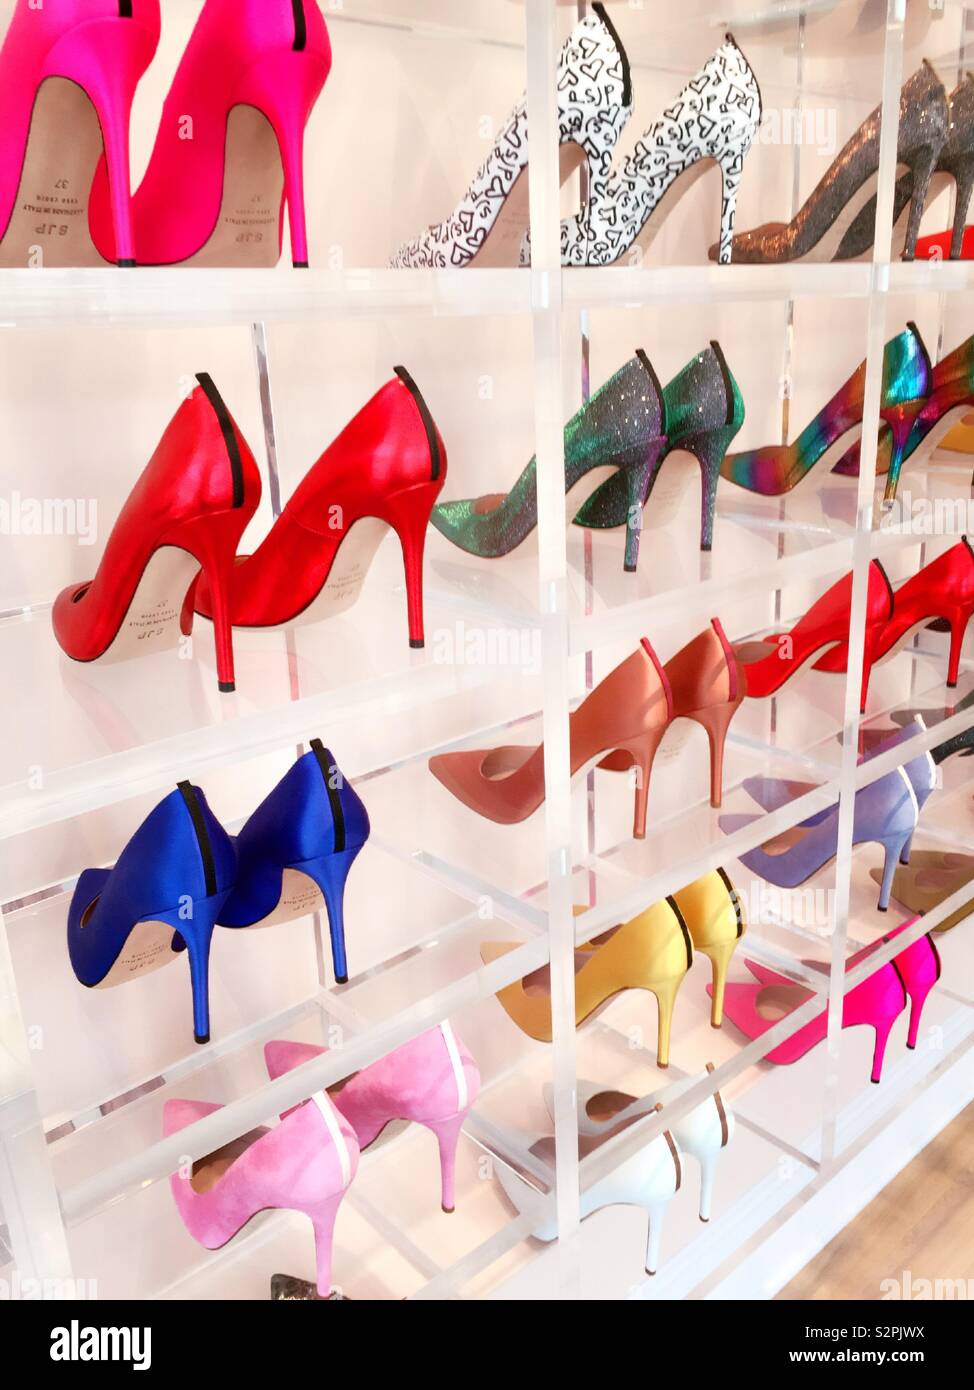 Vibrant designer high heel shoes at the Sarah Jessica Parker boutique in the South St., Seaport, Manhattan, New York City, United States Stock Photo